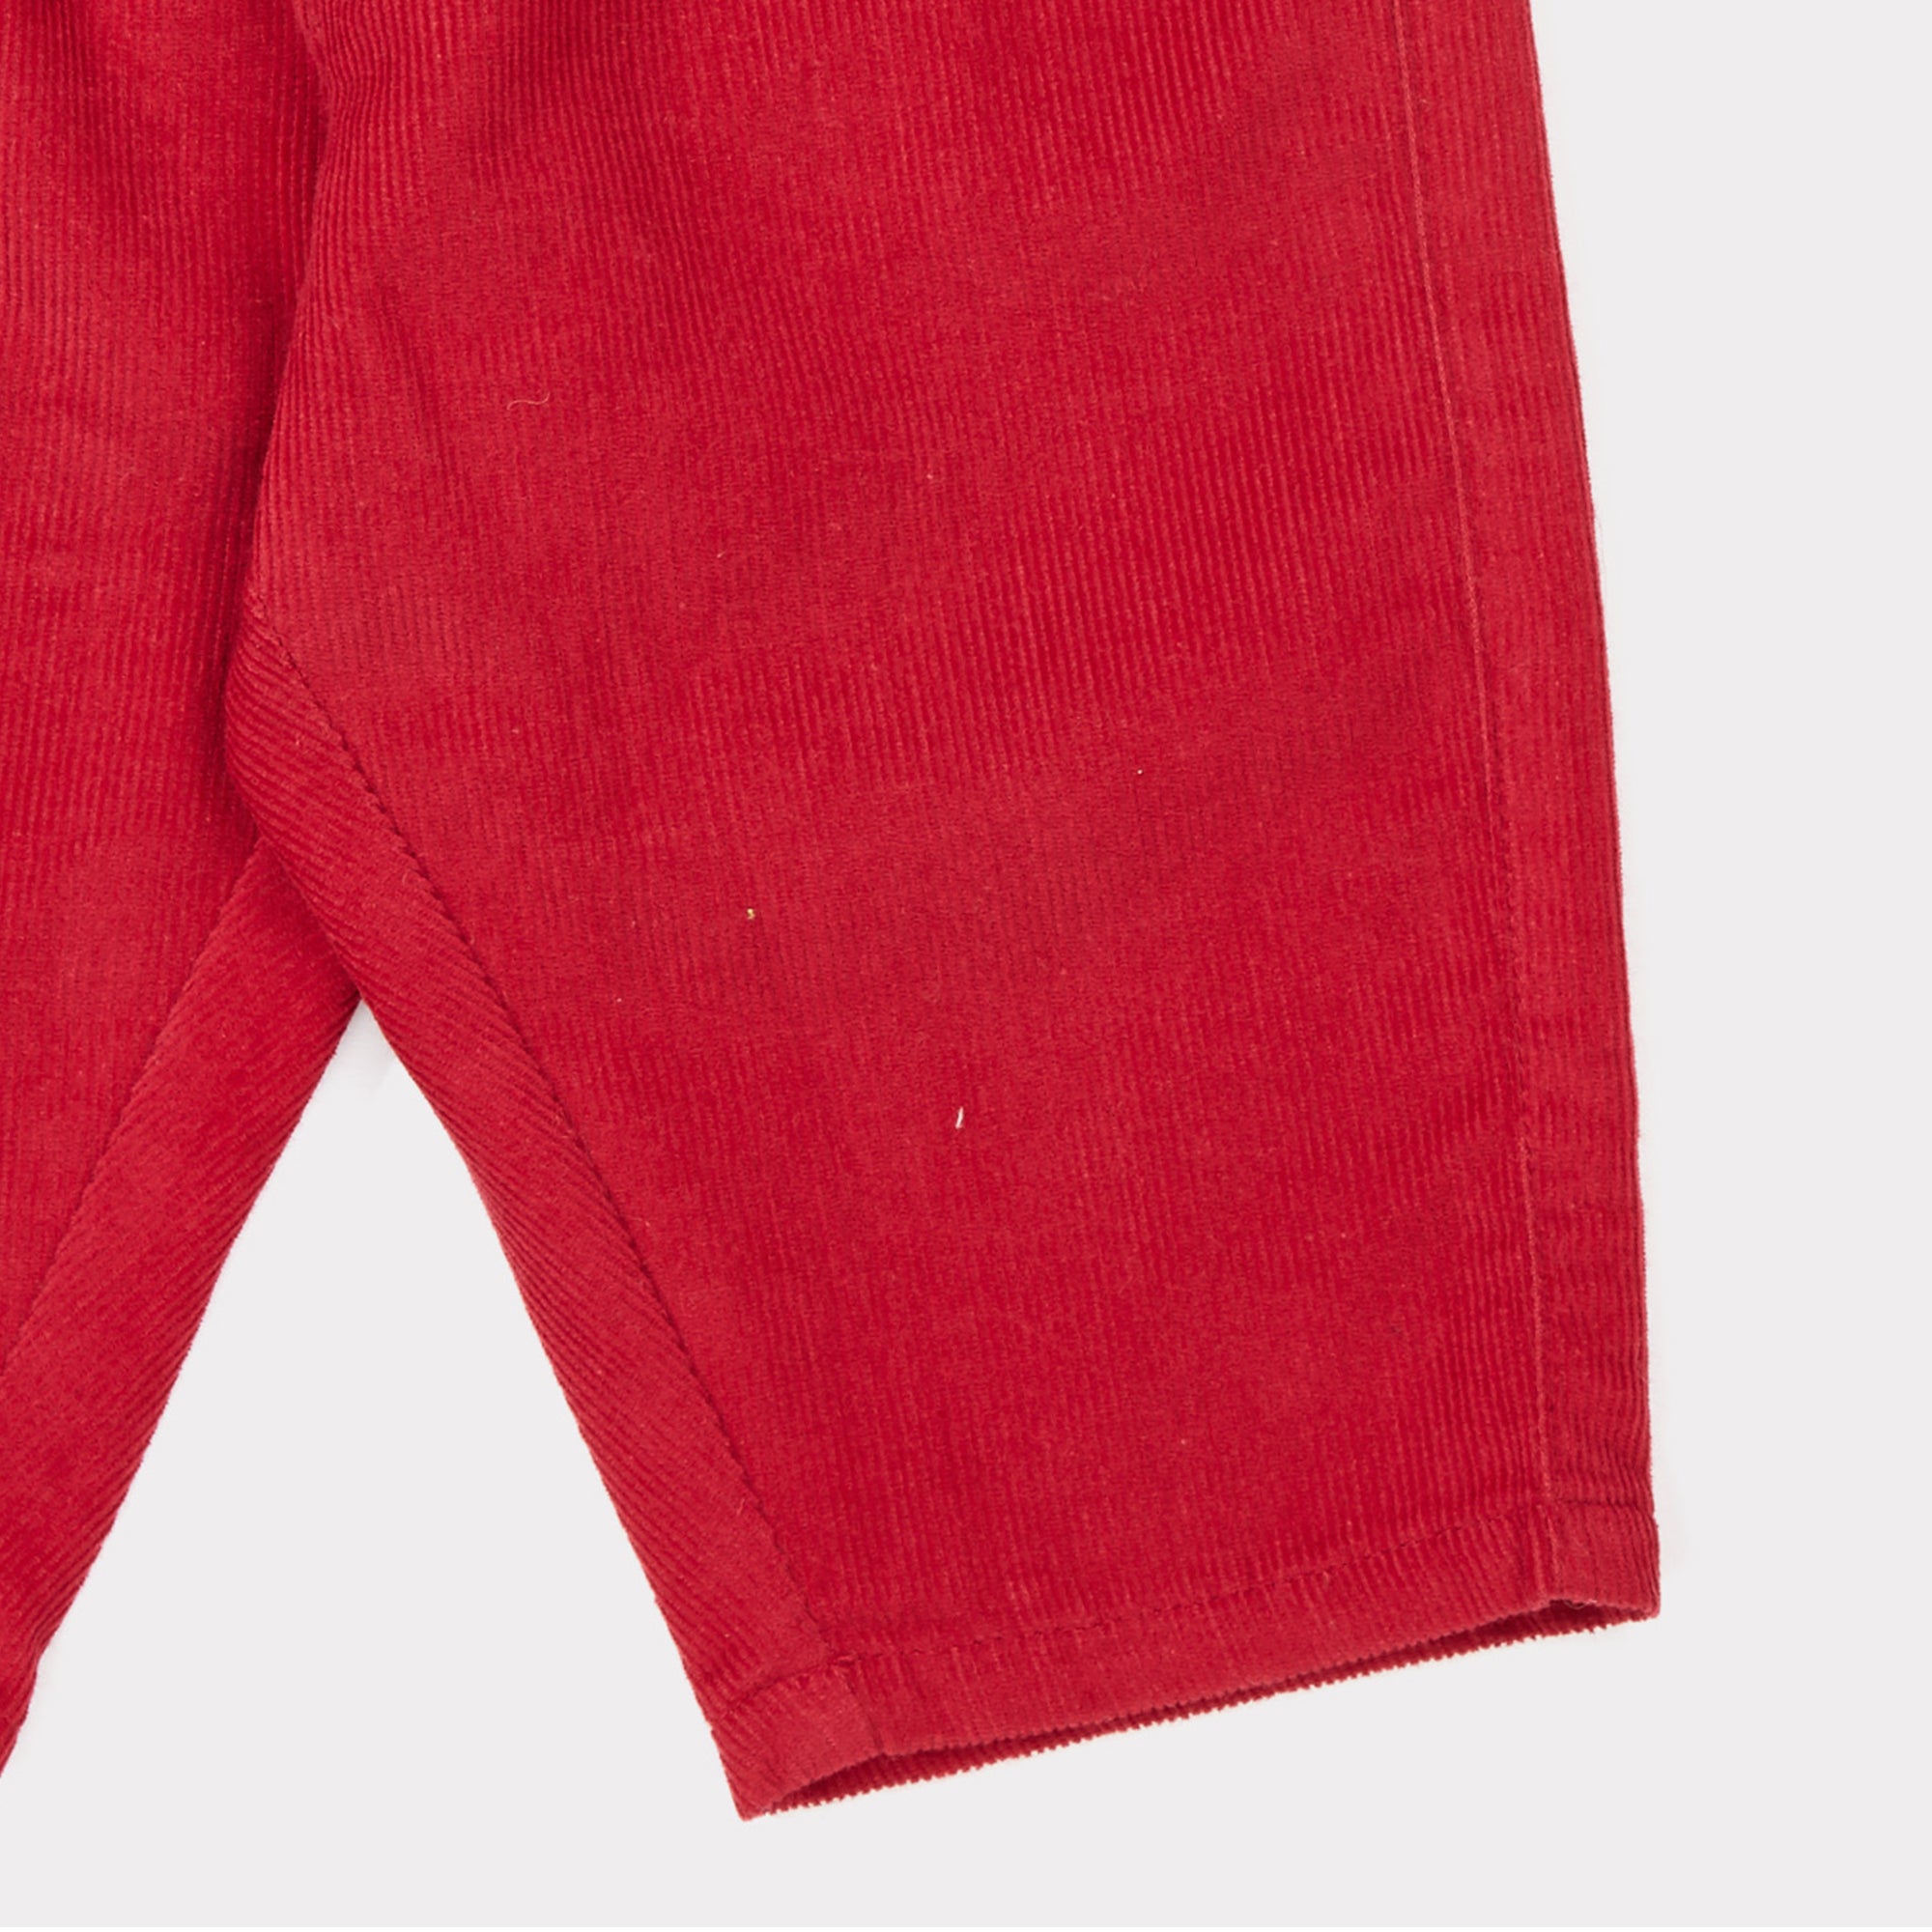 Baby Tomato Cotton Woven Trousers